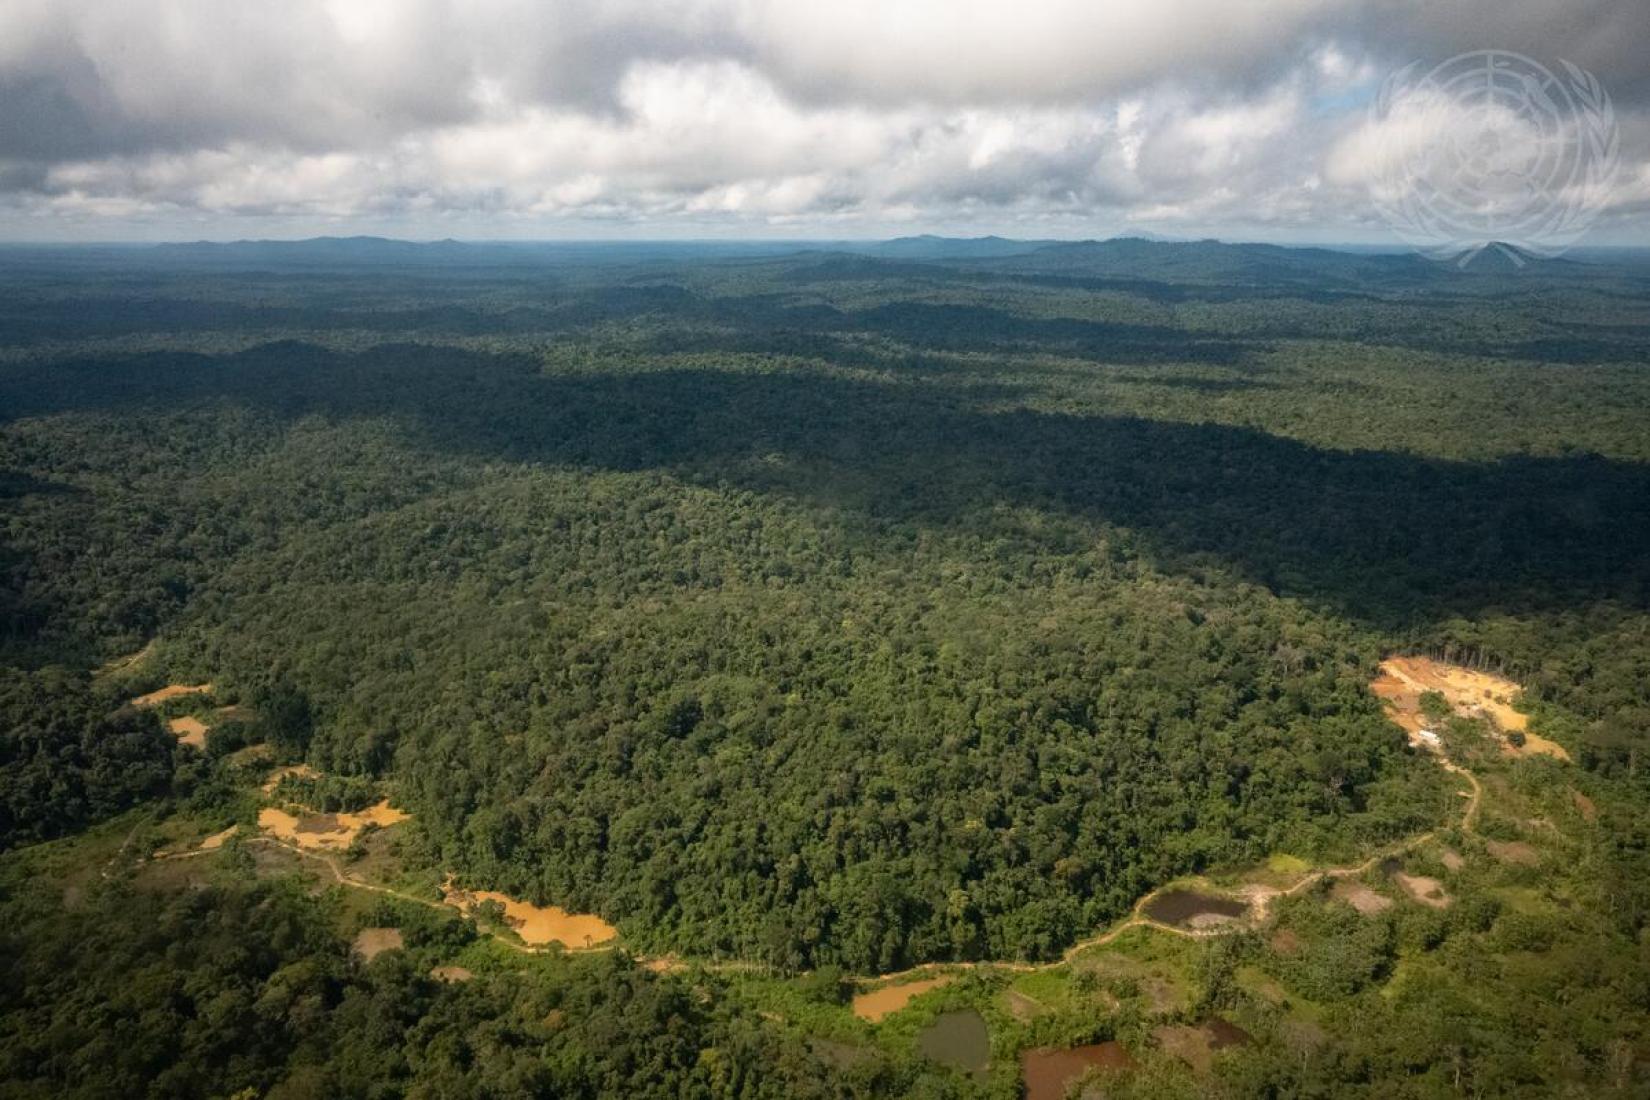 Areal photo of Suriname's rainforest